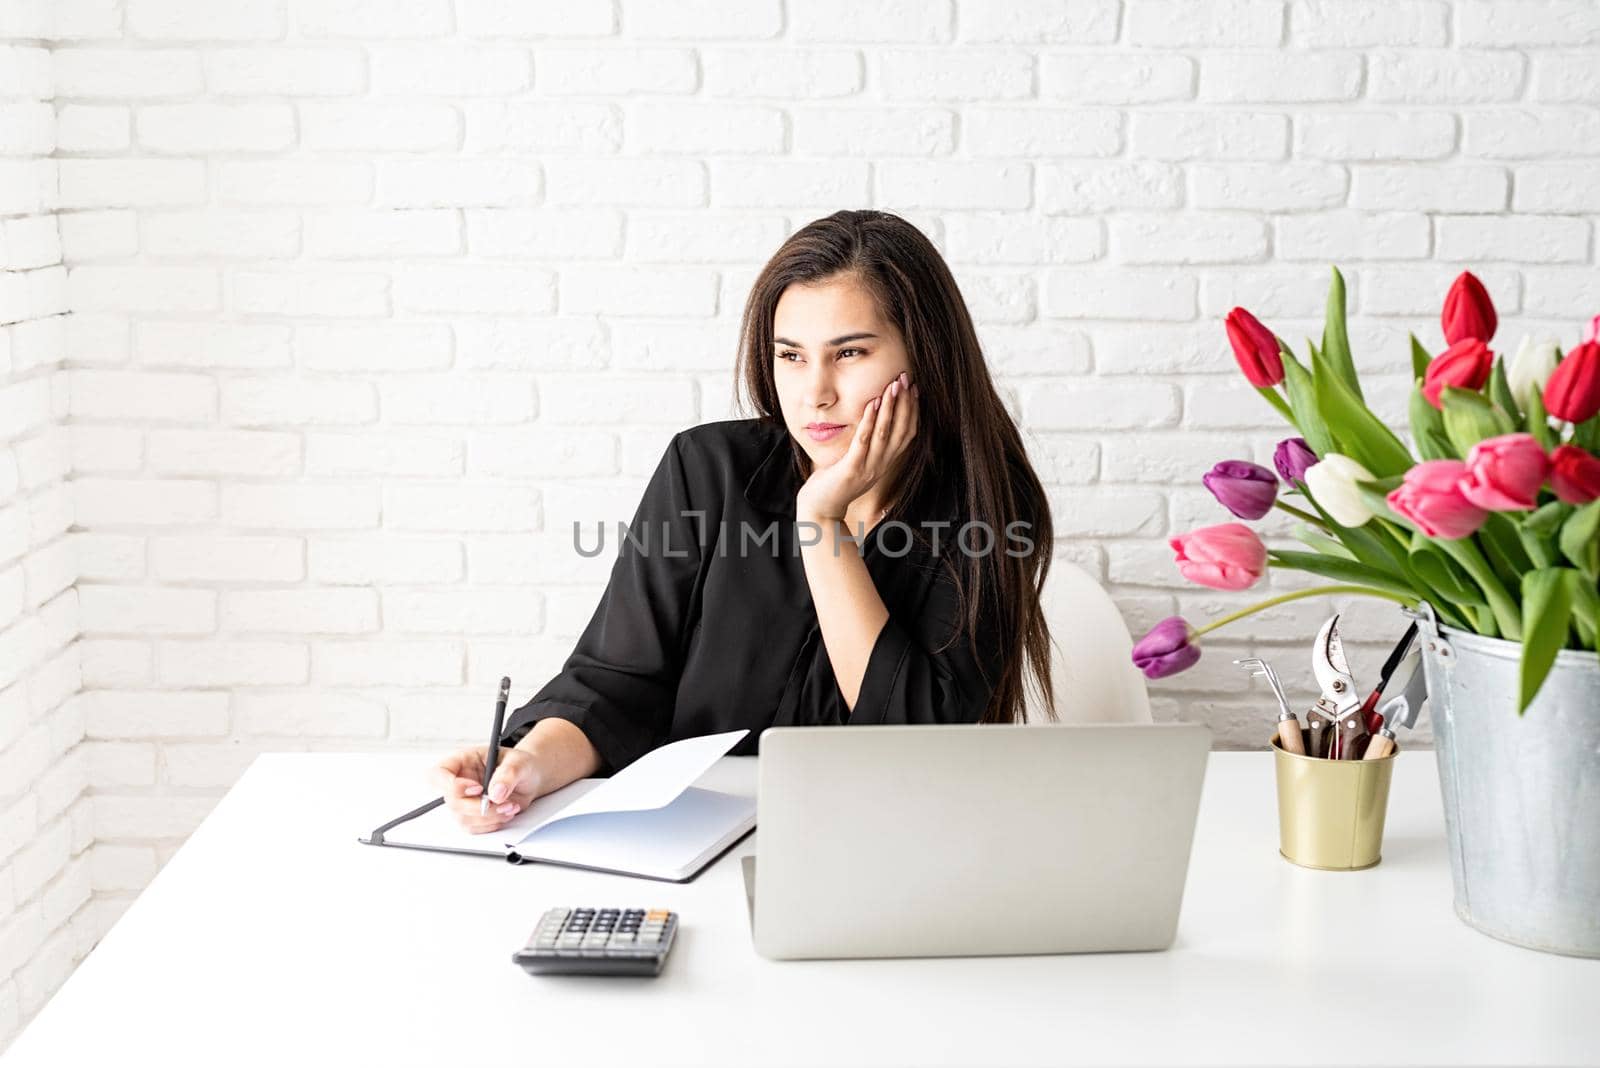 A young business woman florist writing in notebook, using laptop in the office by Desperada